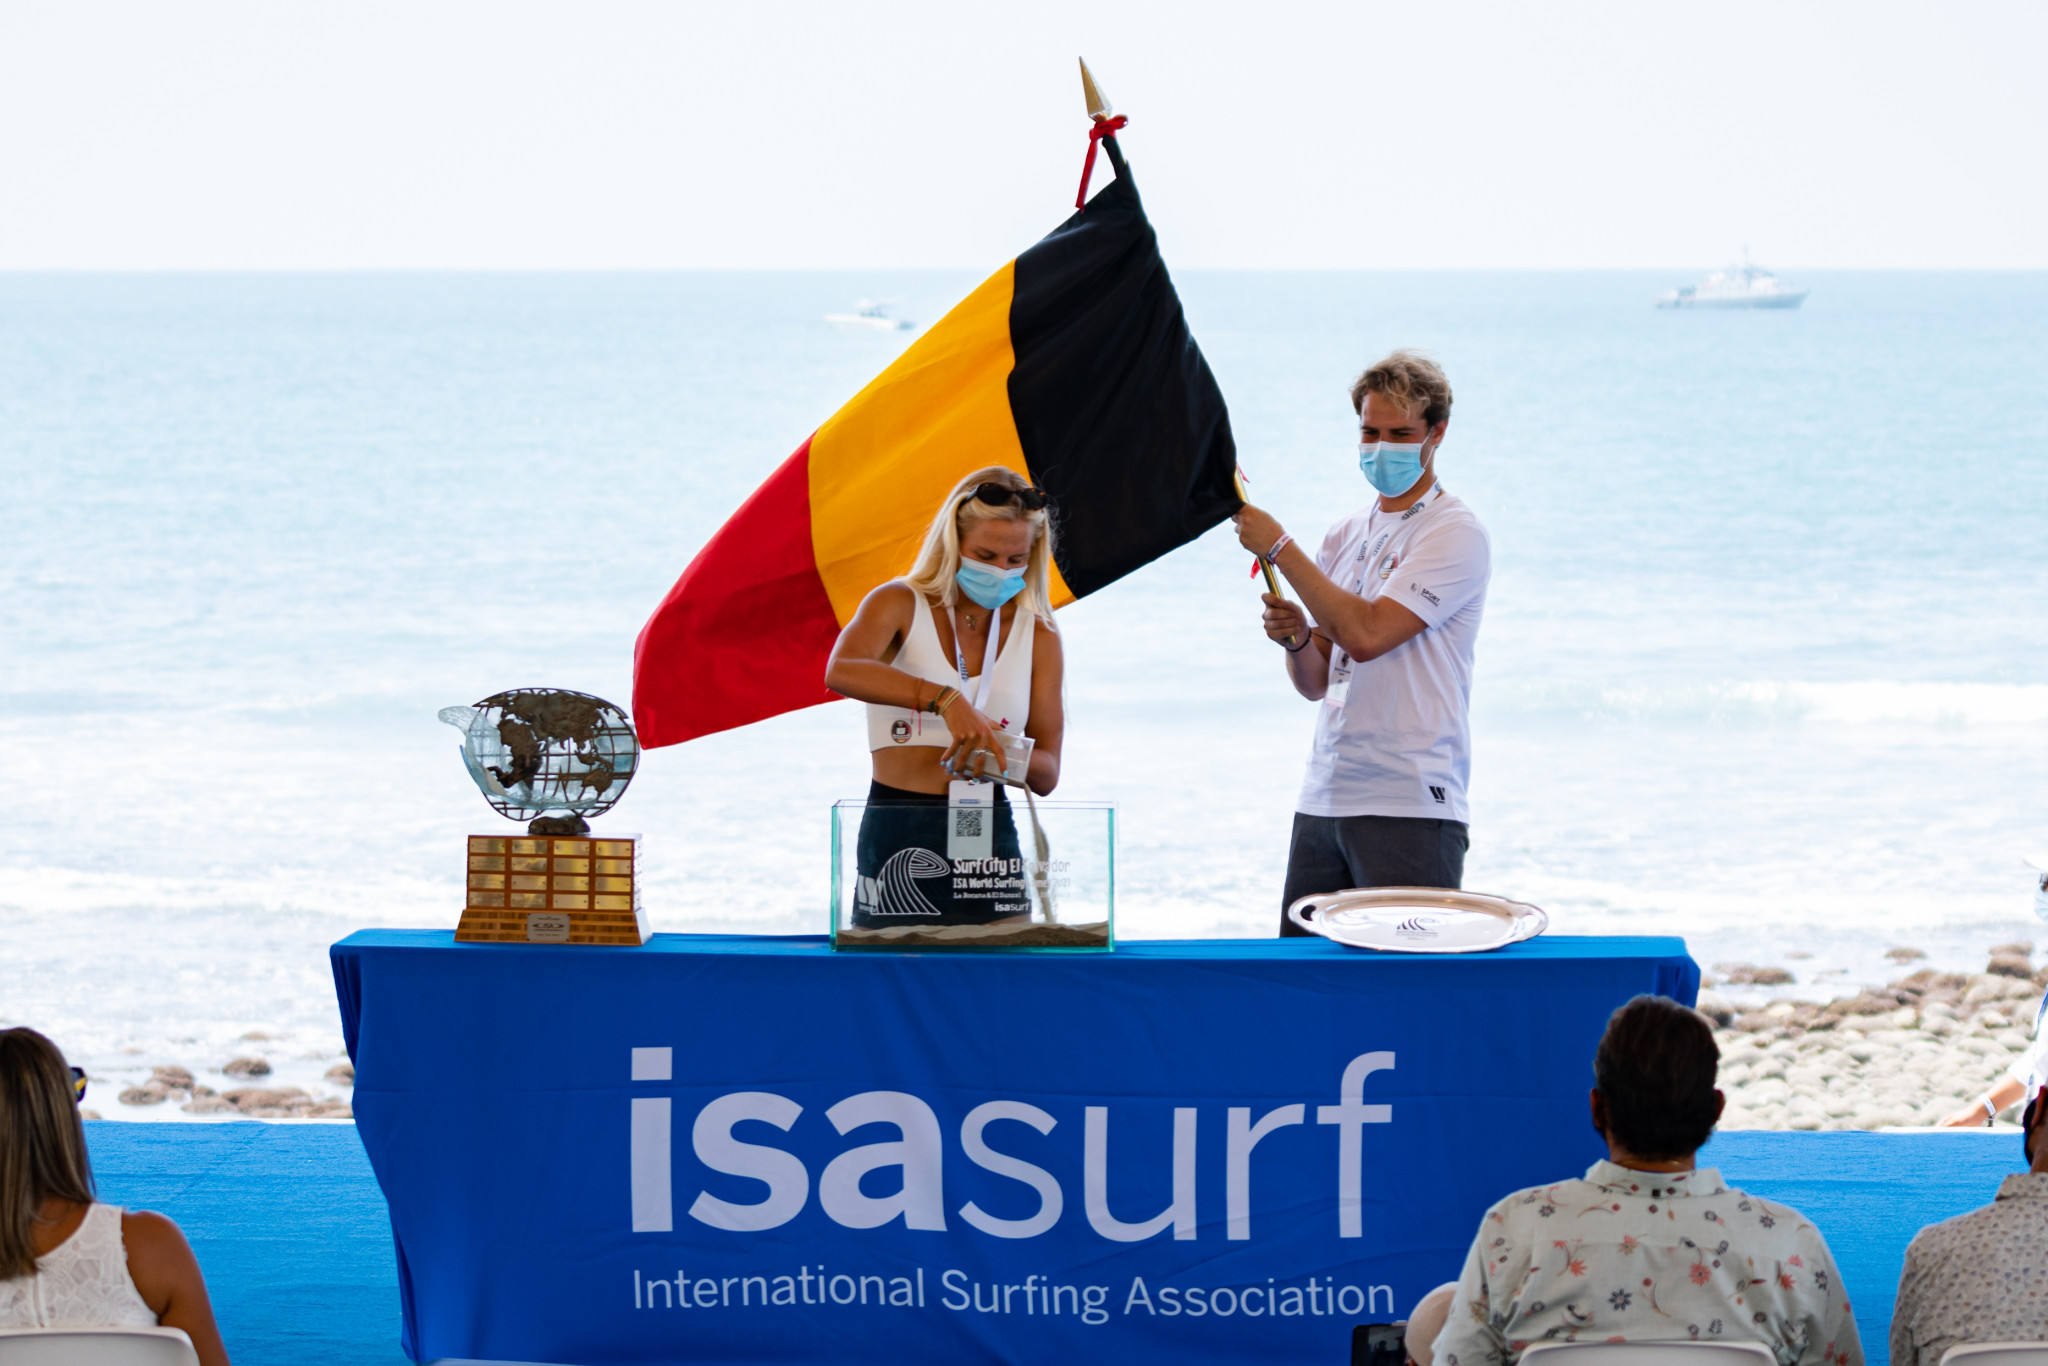 Belgium's participants take part in the Sands of the World ceremony ©ISA/Ben Reed